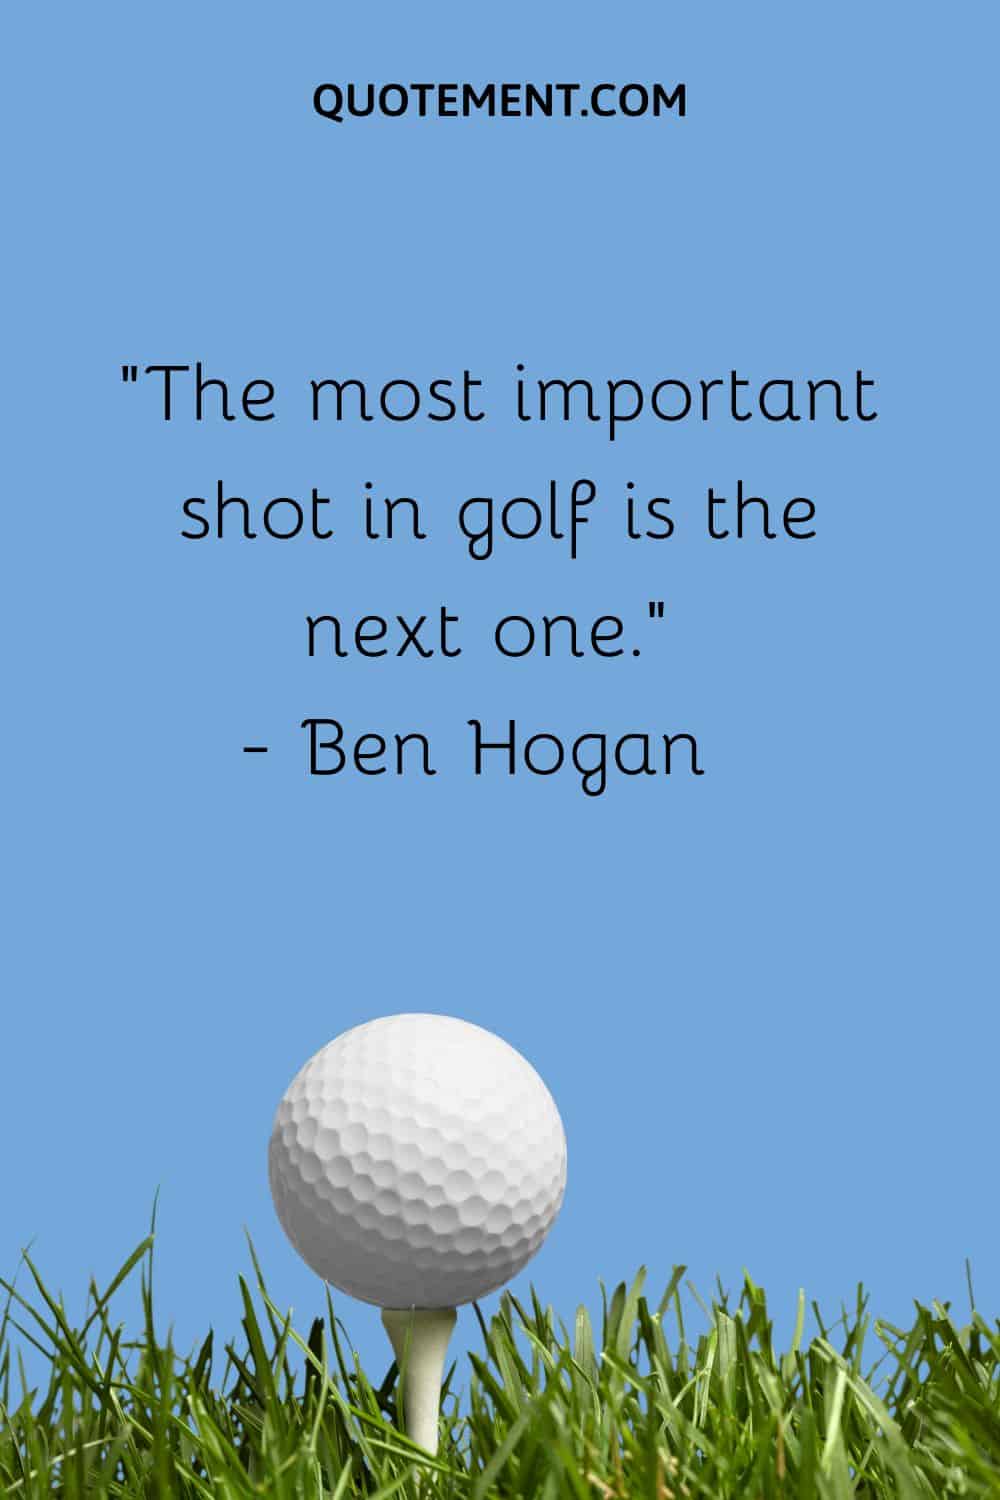 The most important shot in golf is the next one